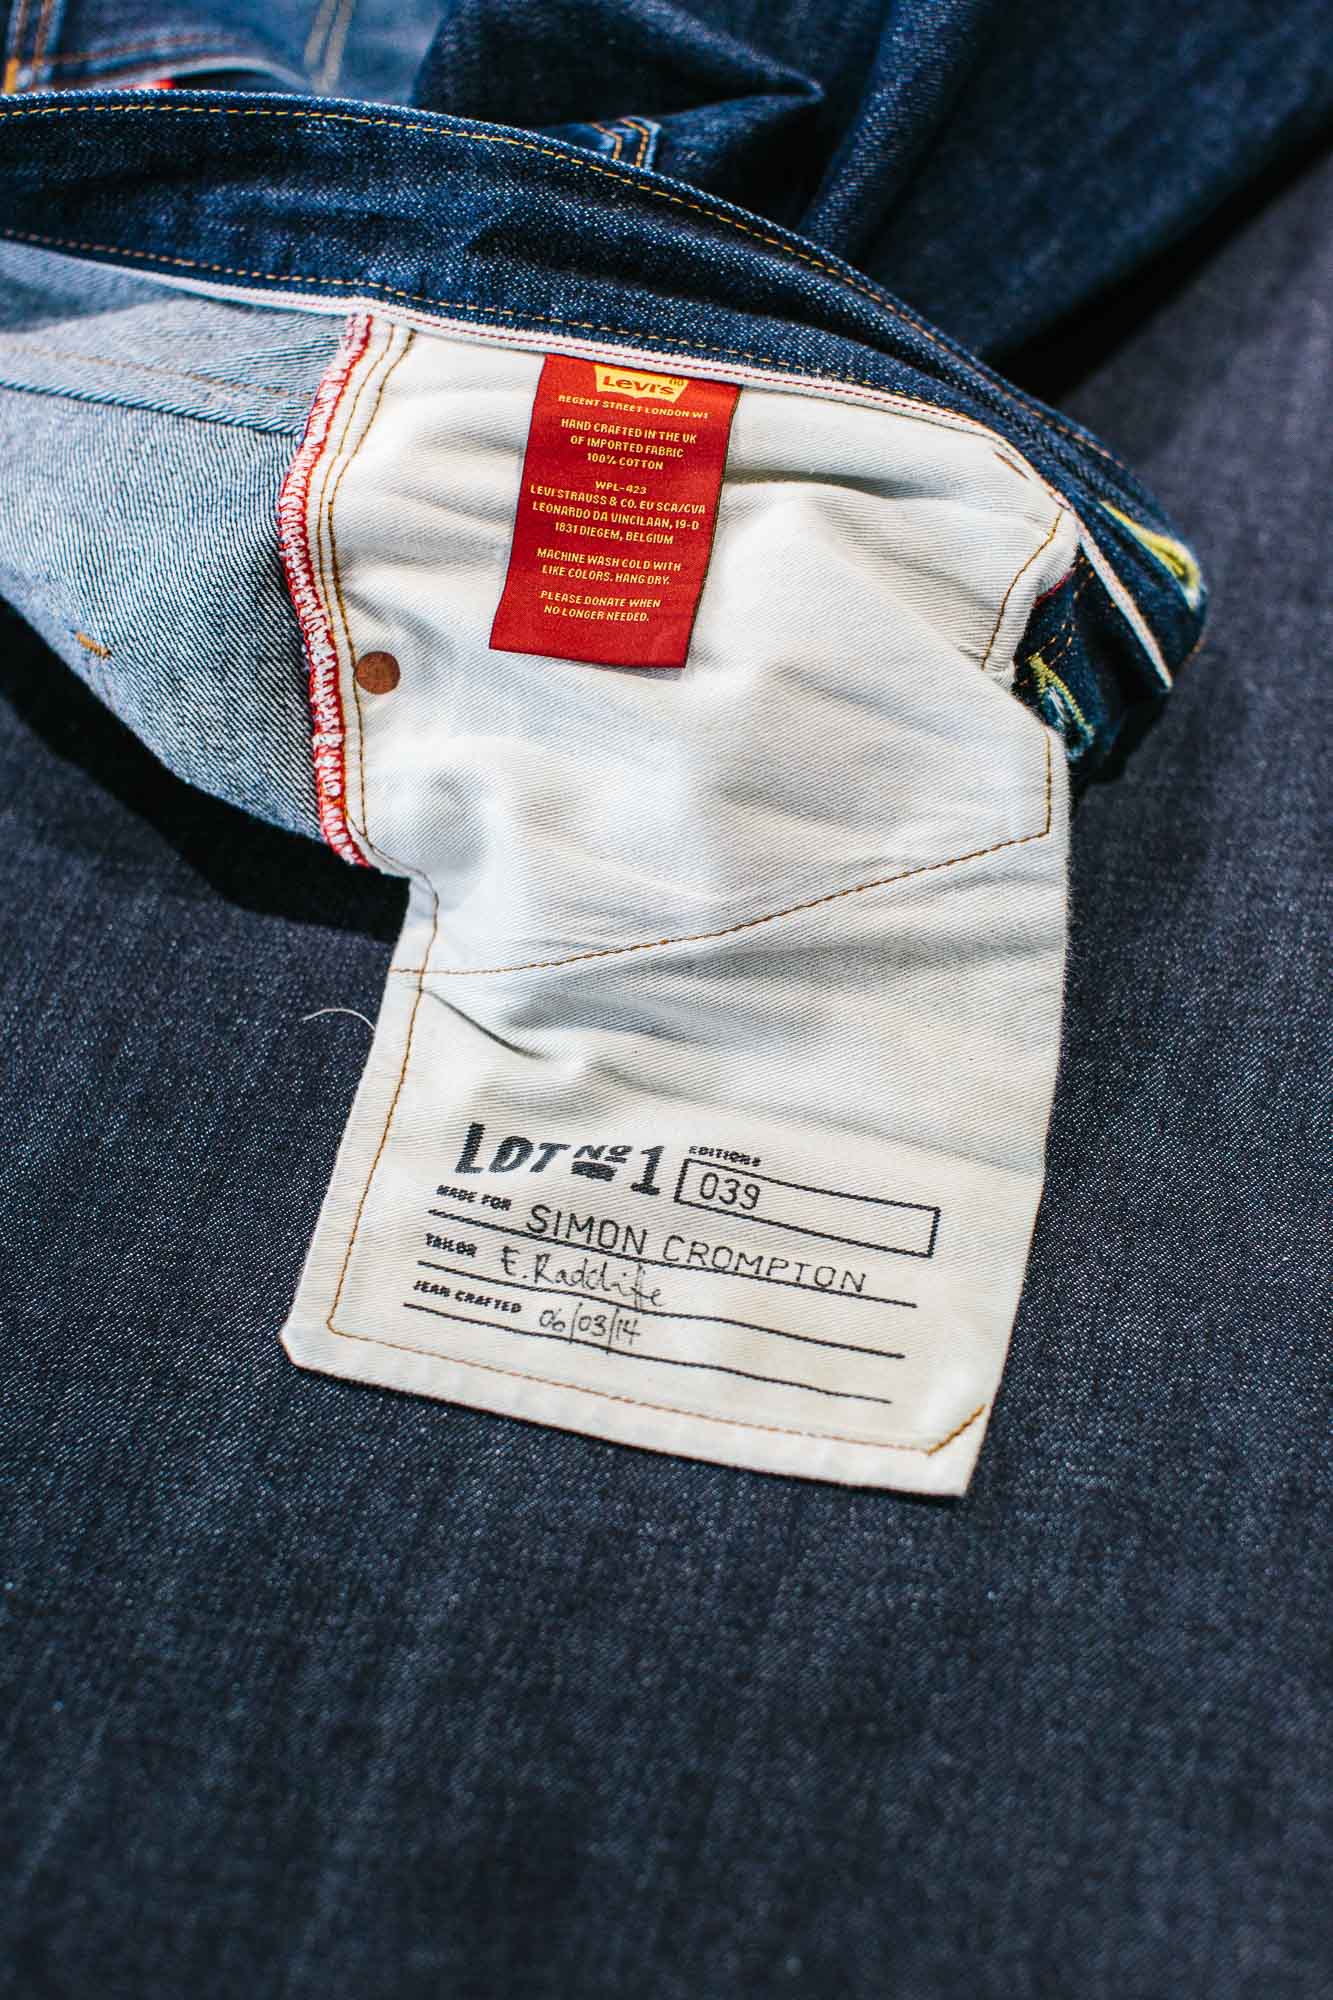 levi's made to measure